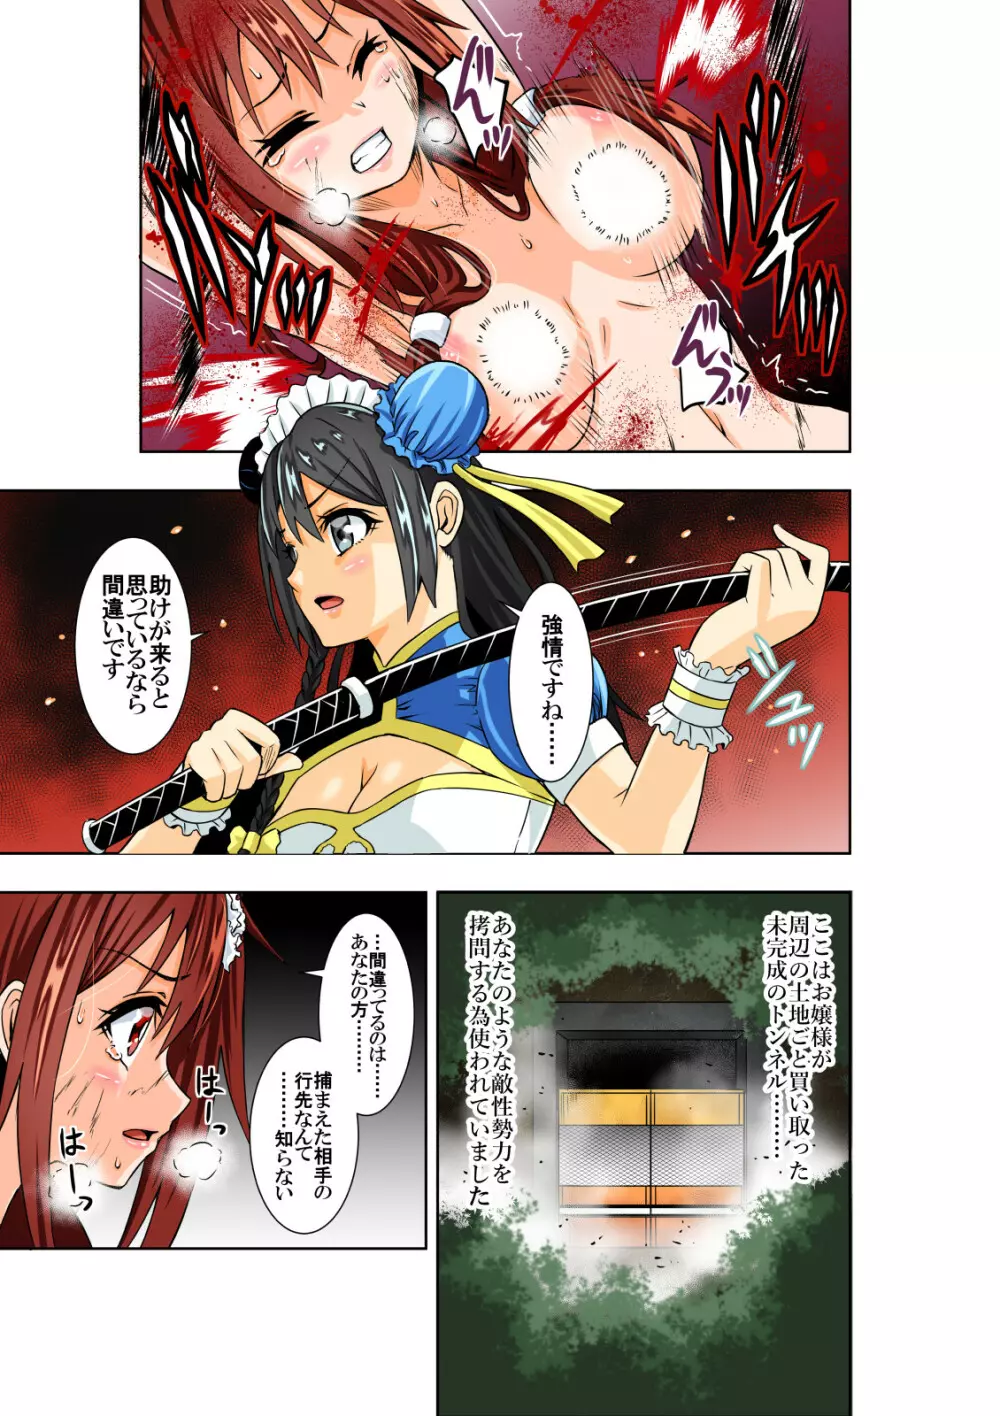 BOUNTY HUNTER GIRL vs TORTURE MAID - page6